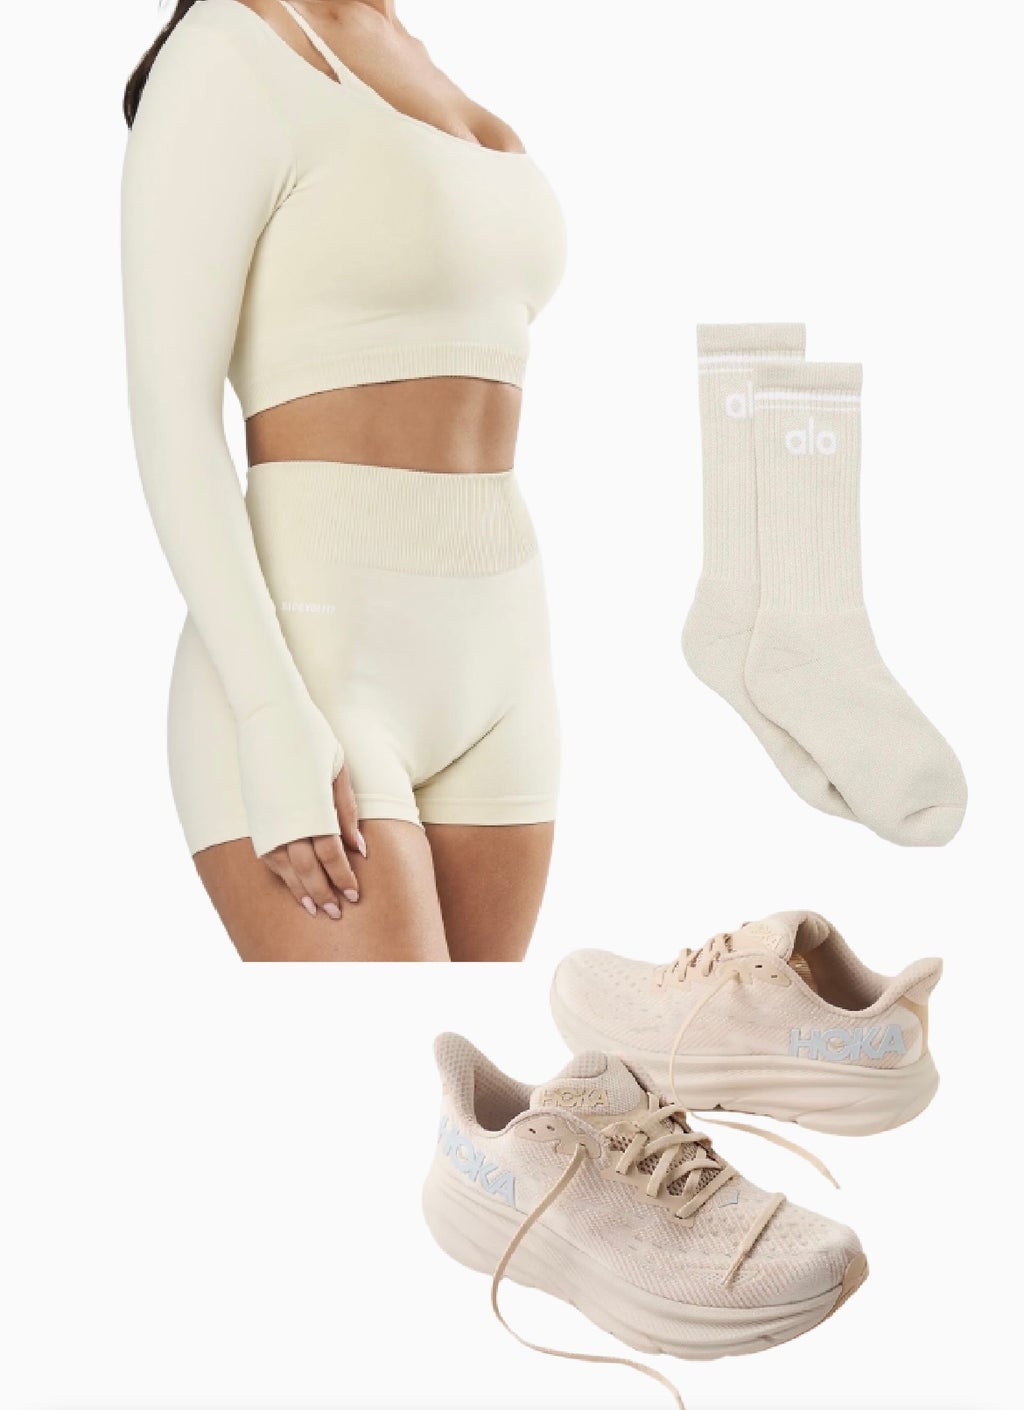 Hoka shoes - outfit collage